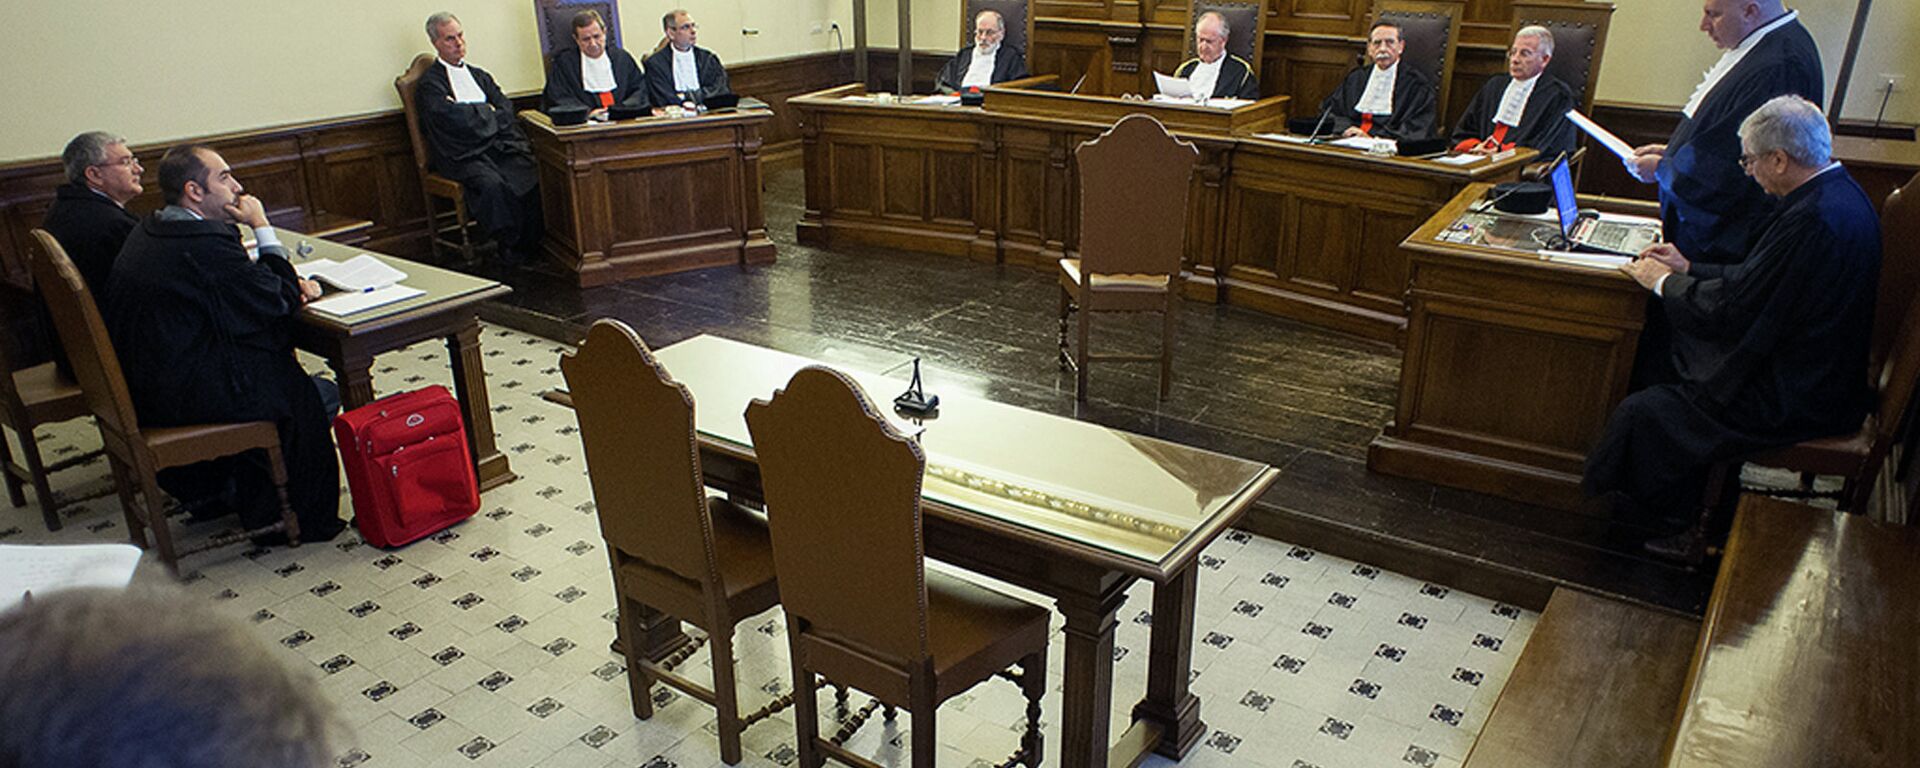 A view of the courtroom during an hearing of the trial against former papal diplomat Jozef Wesolowski, at the Vatican, Saturday, July 11, 2015 - Sputnik International, 1920, 17.12.2023